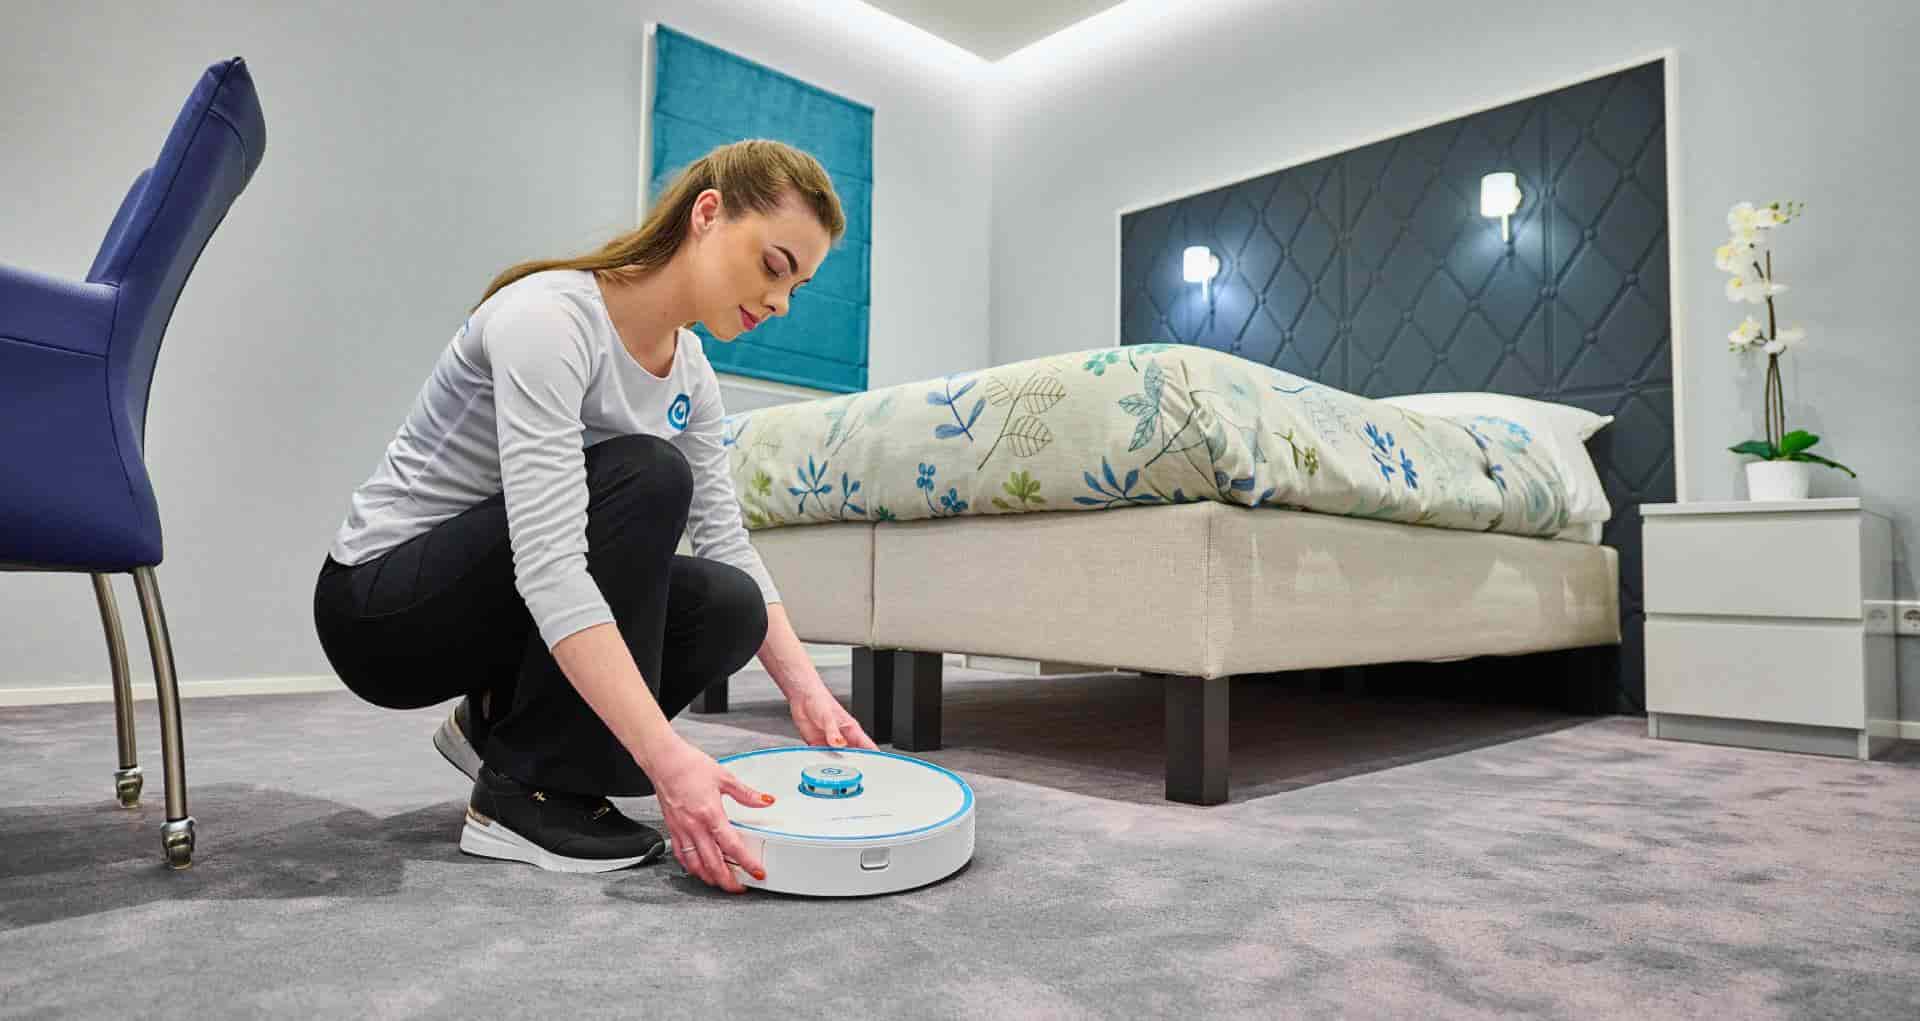 The co-botic 1700 is our smart vacuum cleaner that works together with the human cleaner